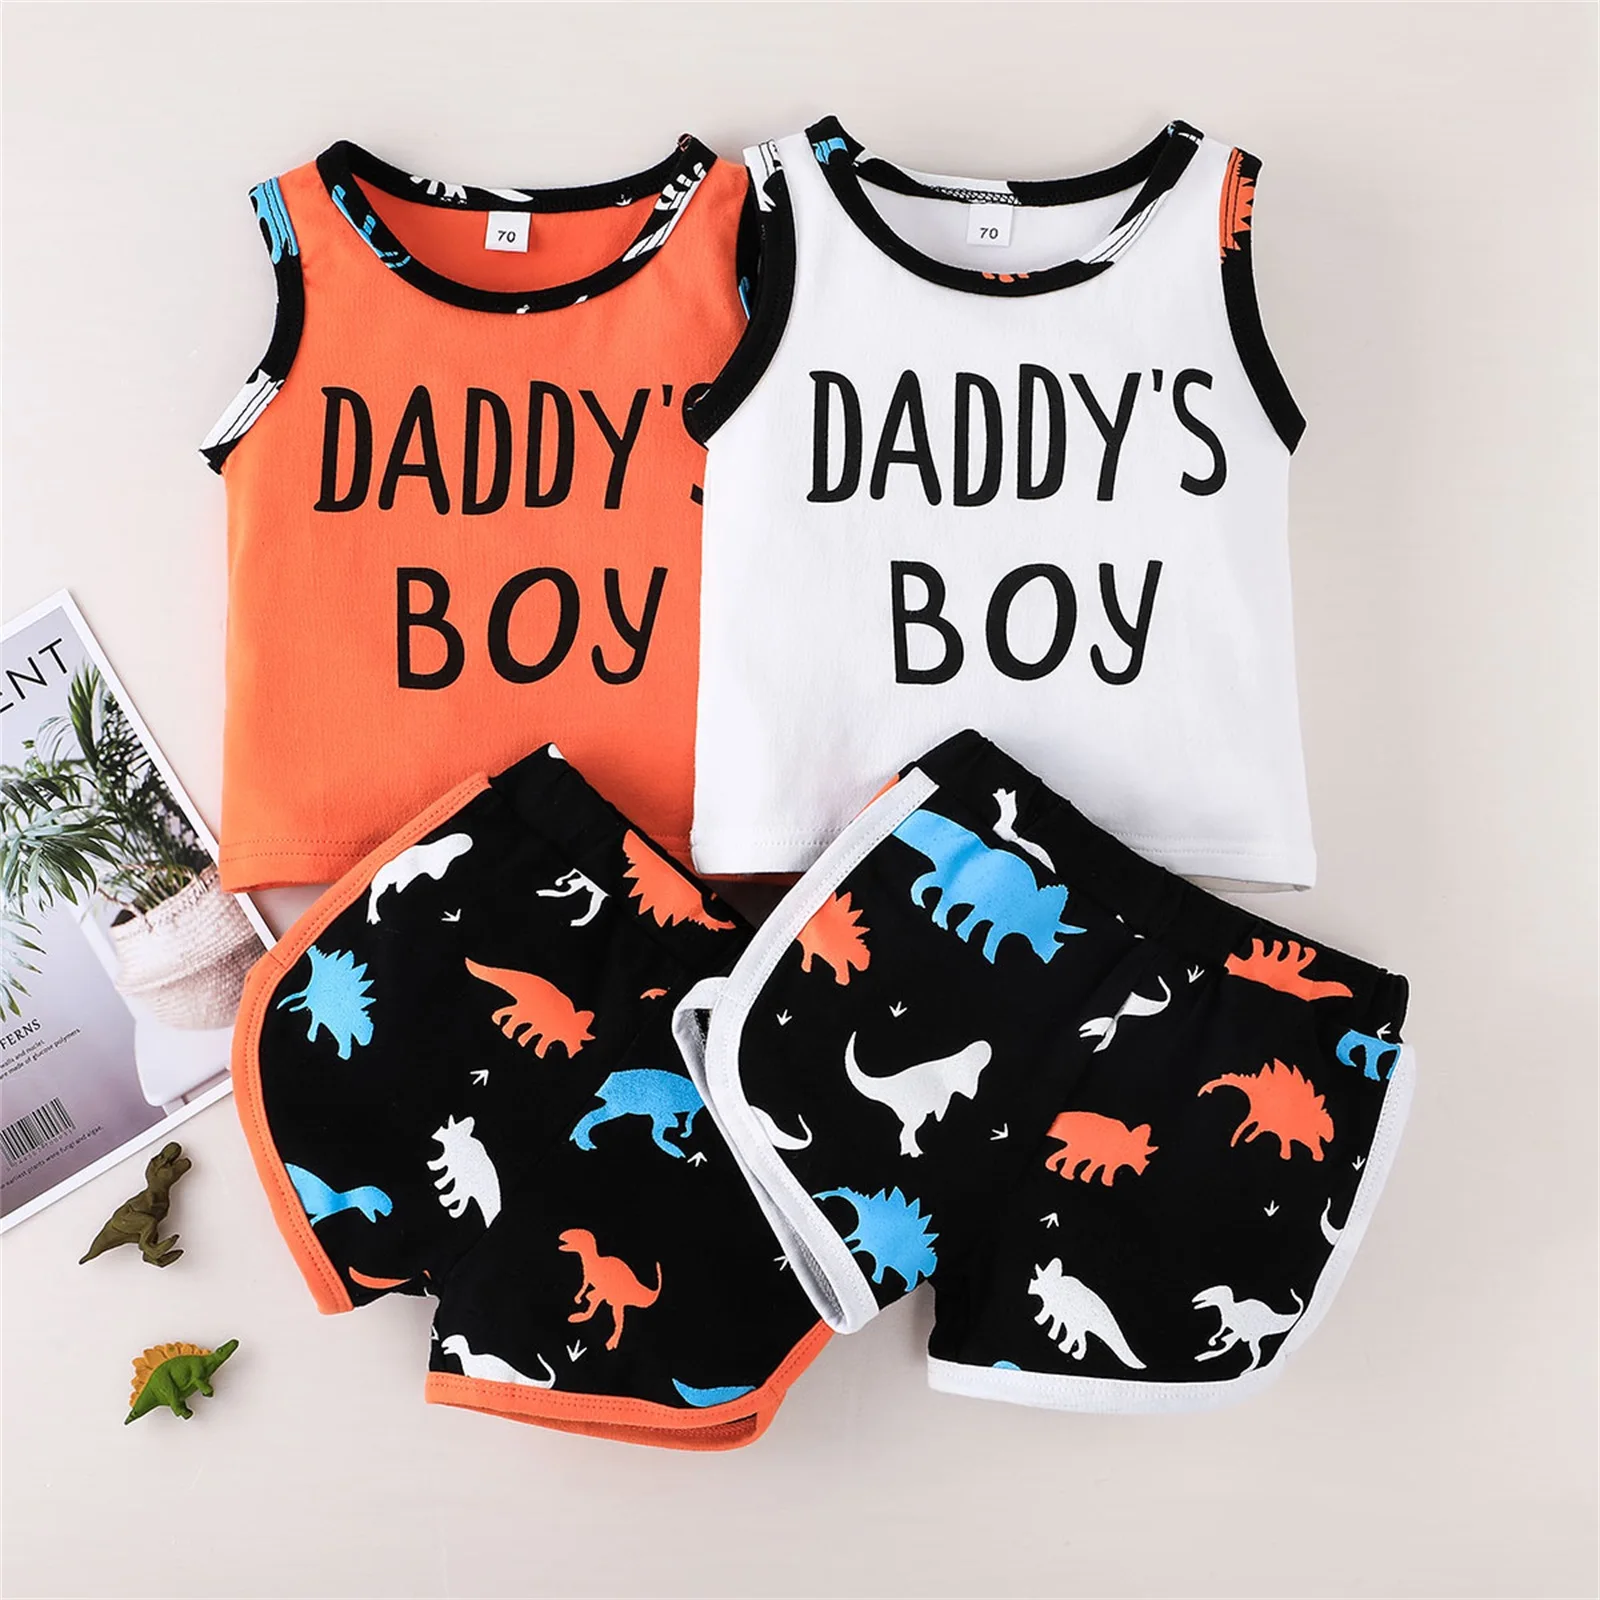 

2Pcs Baby Boys Clothing Summer Cotton Outfits Letter Print Sleeveless Round Neck Tanks Tops Dinosaur Shorts Casual Set